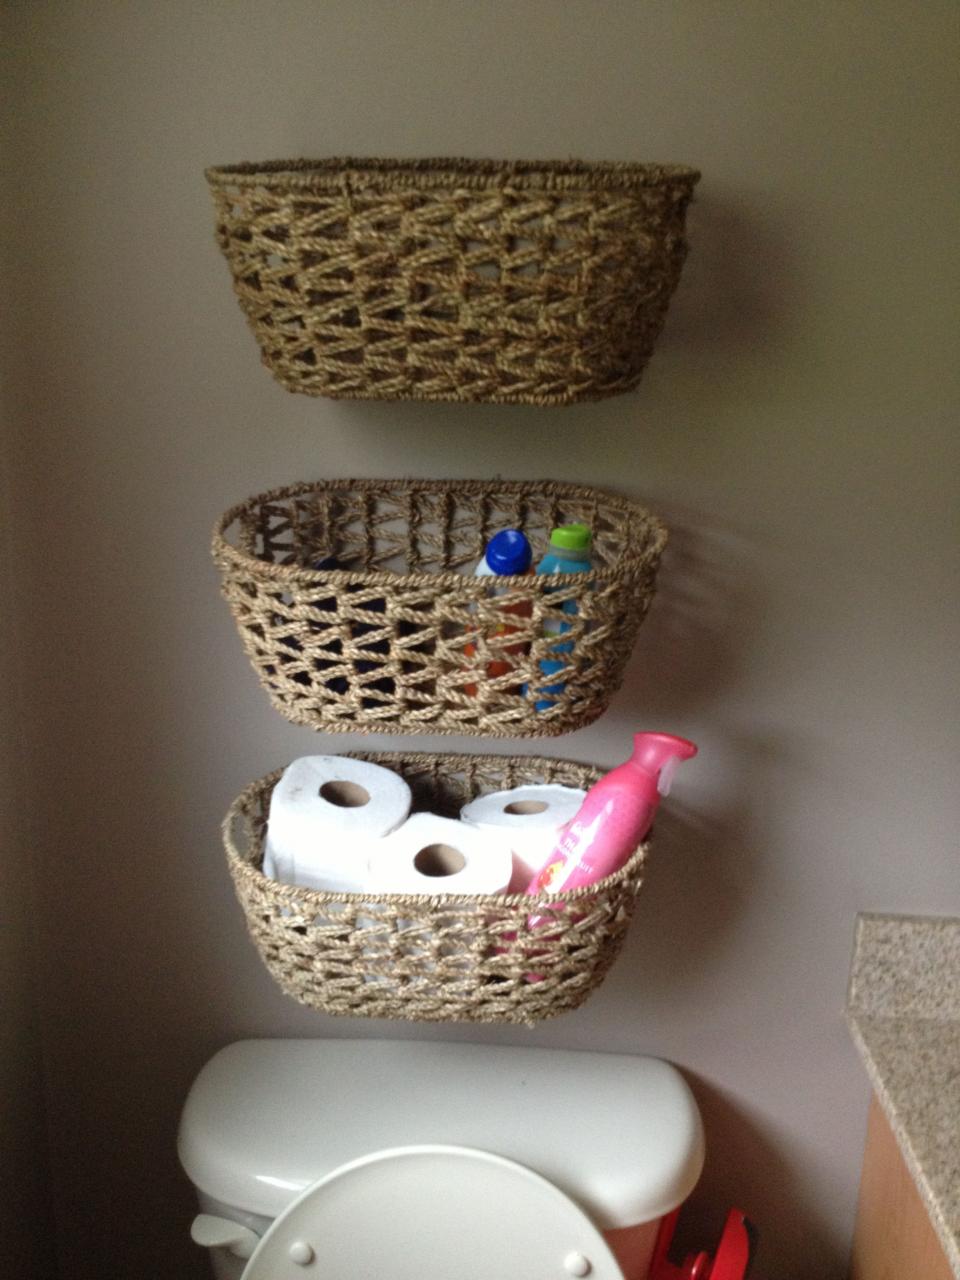 MY version of hanging bathroom baskets. Baskets purchased at Joanne's